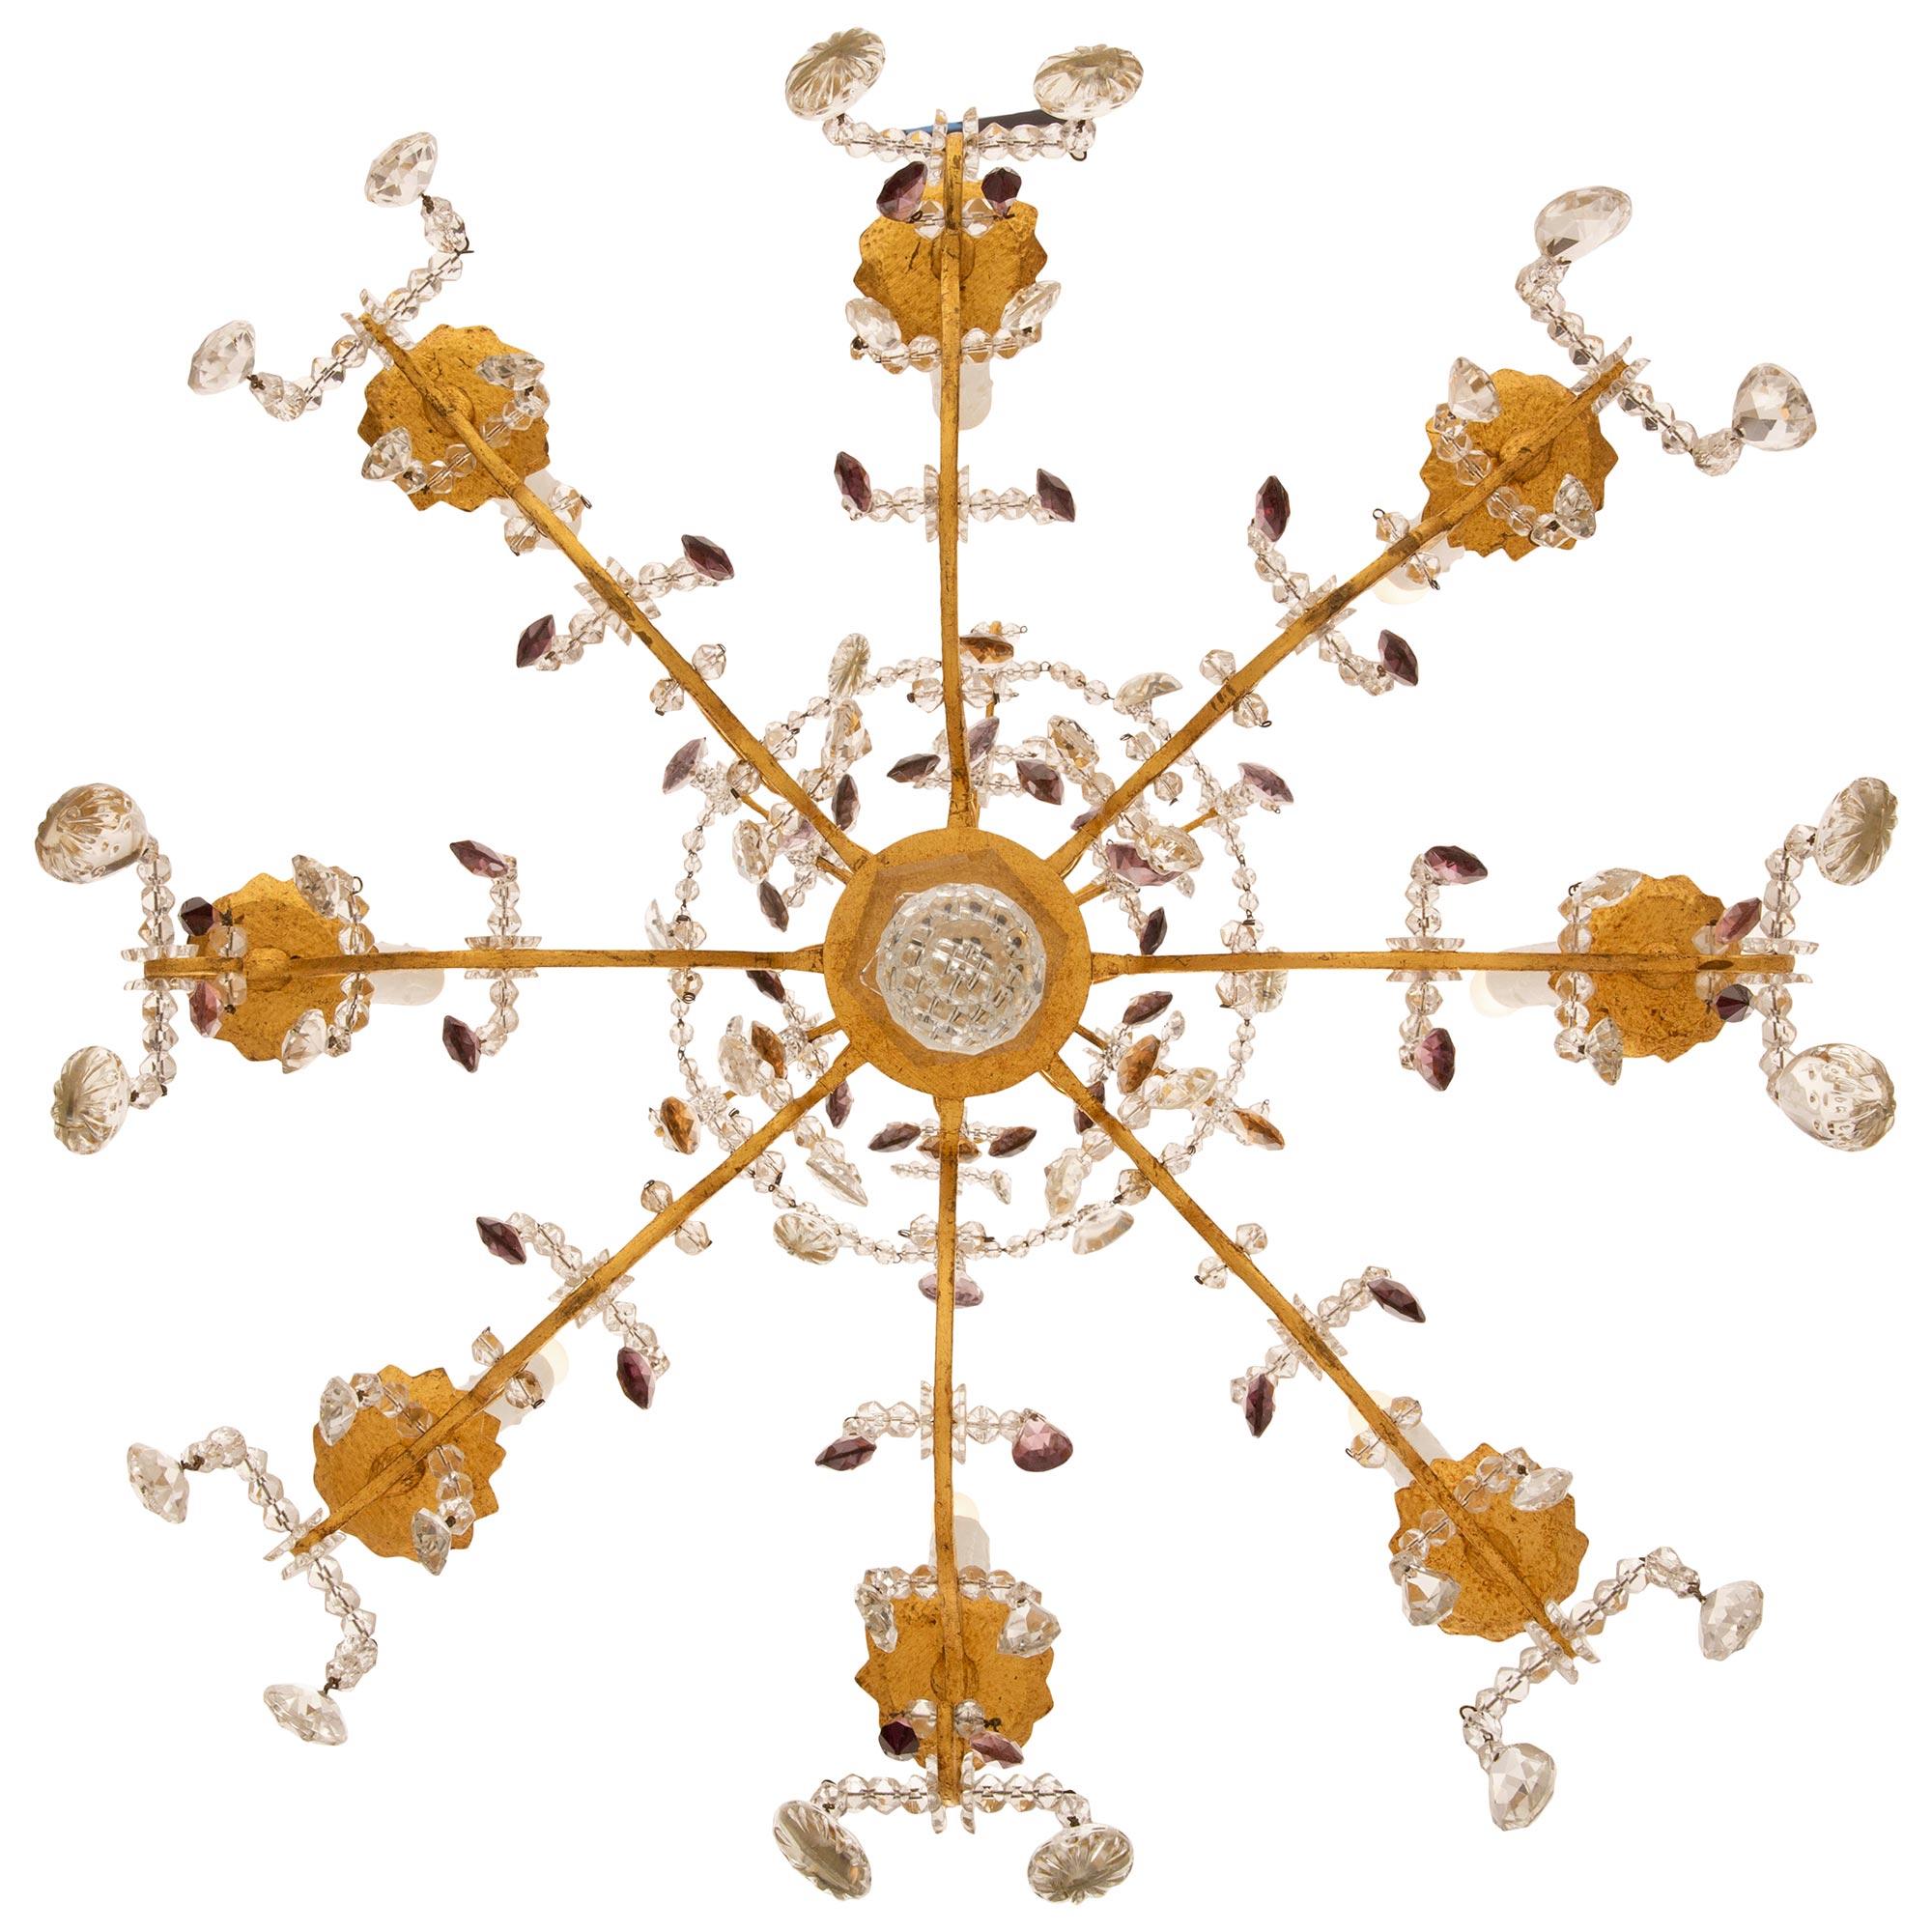 A lovely French turn of the century Louis XV st. gilt metal and crystal chandelier. The eight arm chandelier is centered by a fine bottom facetted cut crystal ball below a lovely curved crystal support from where the arms branch out. Each of the